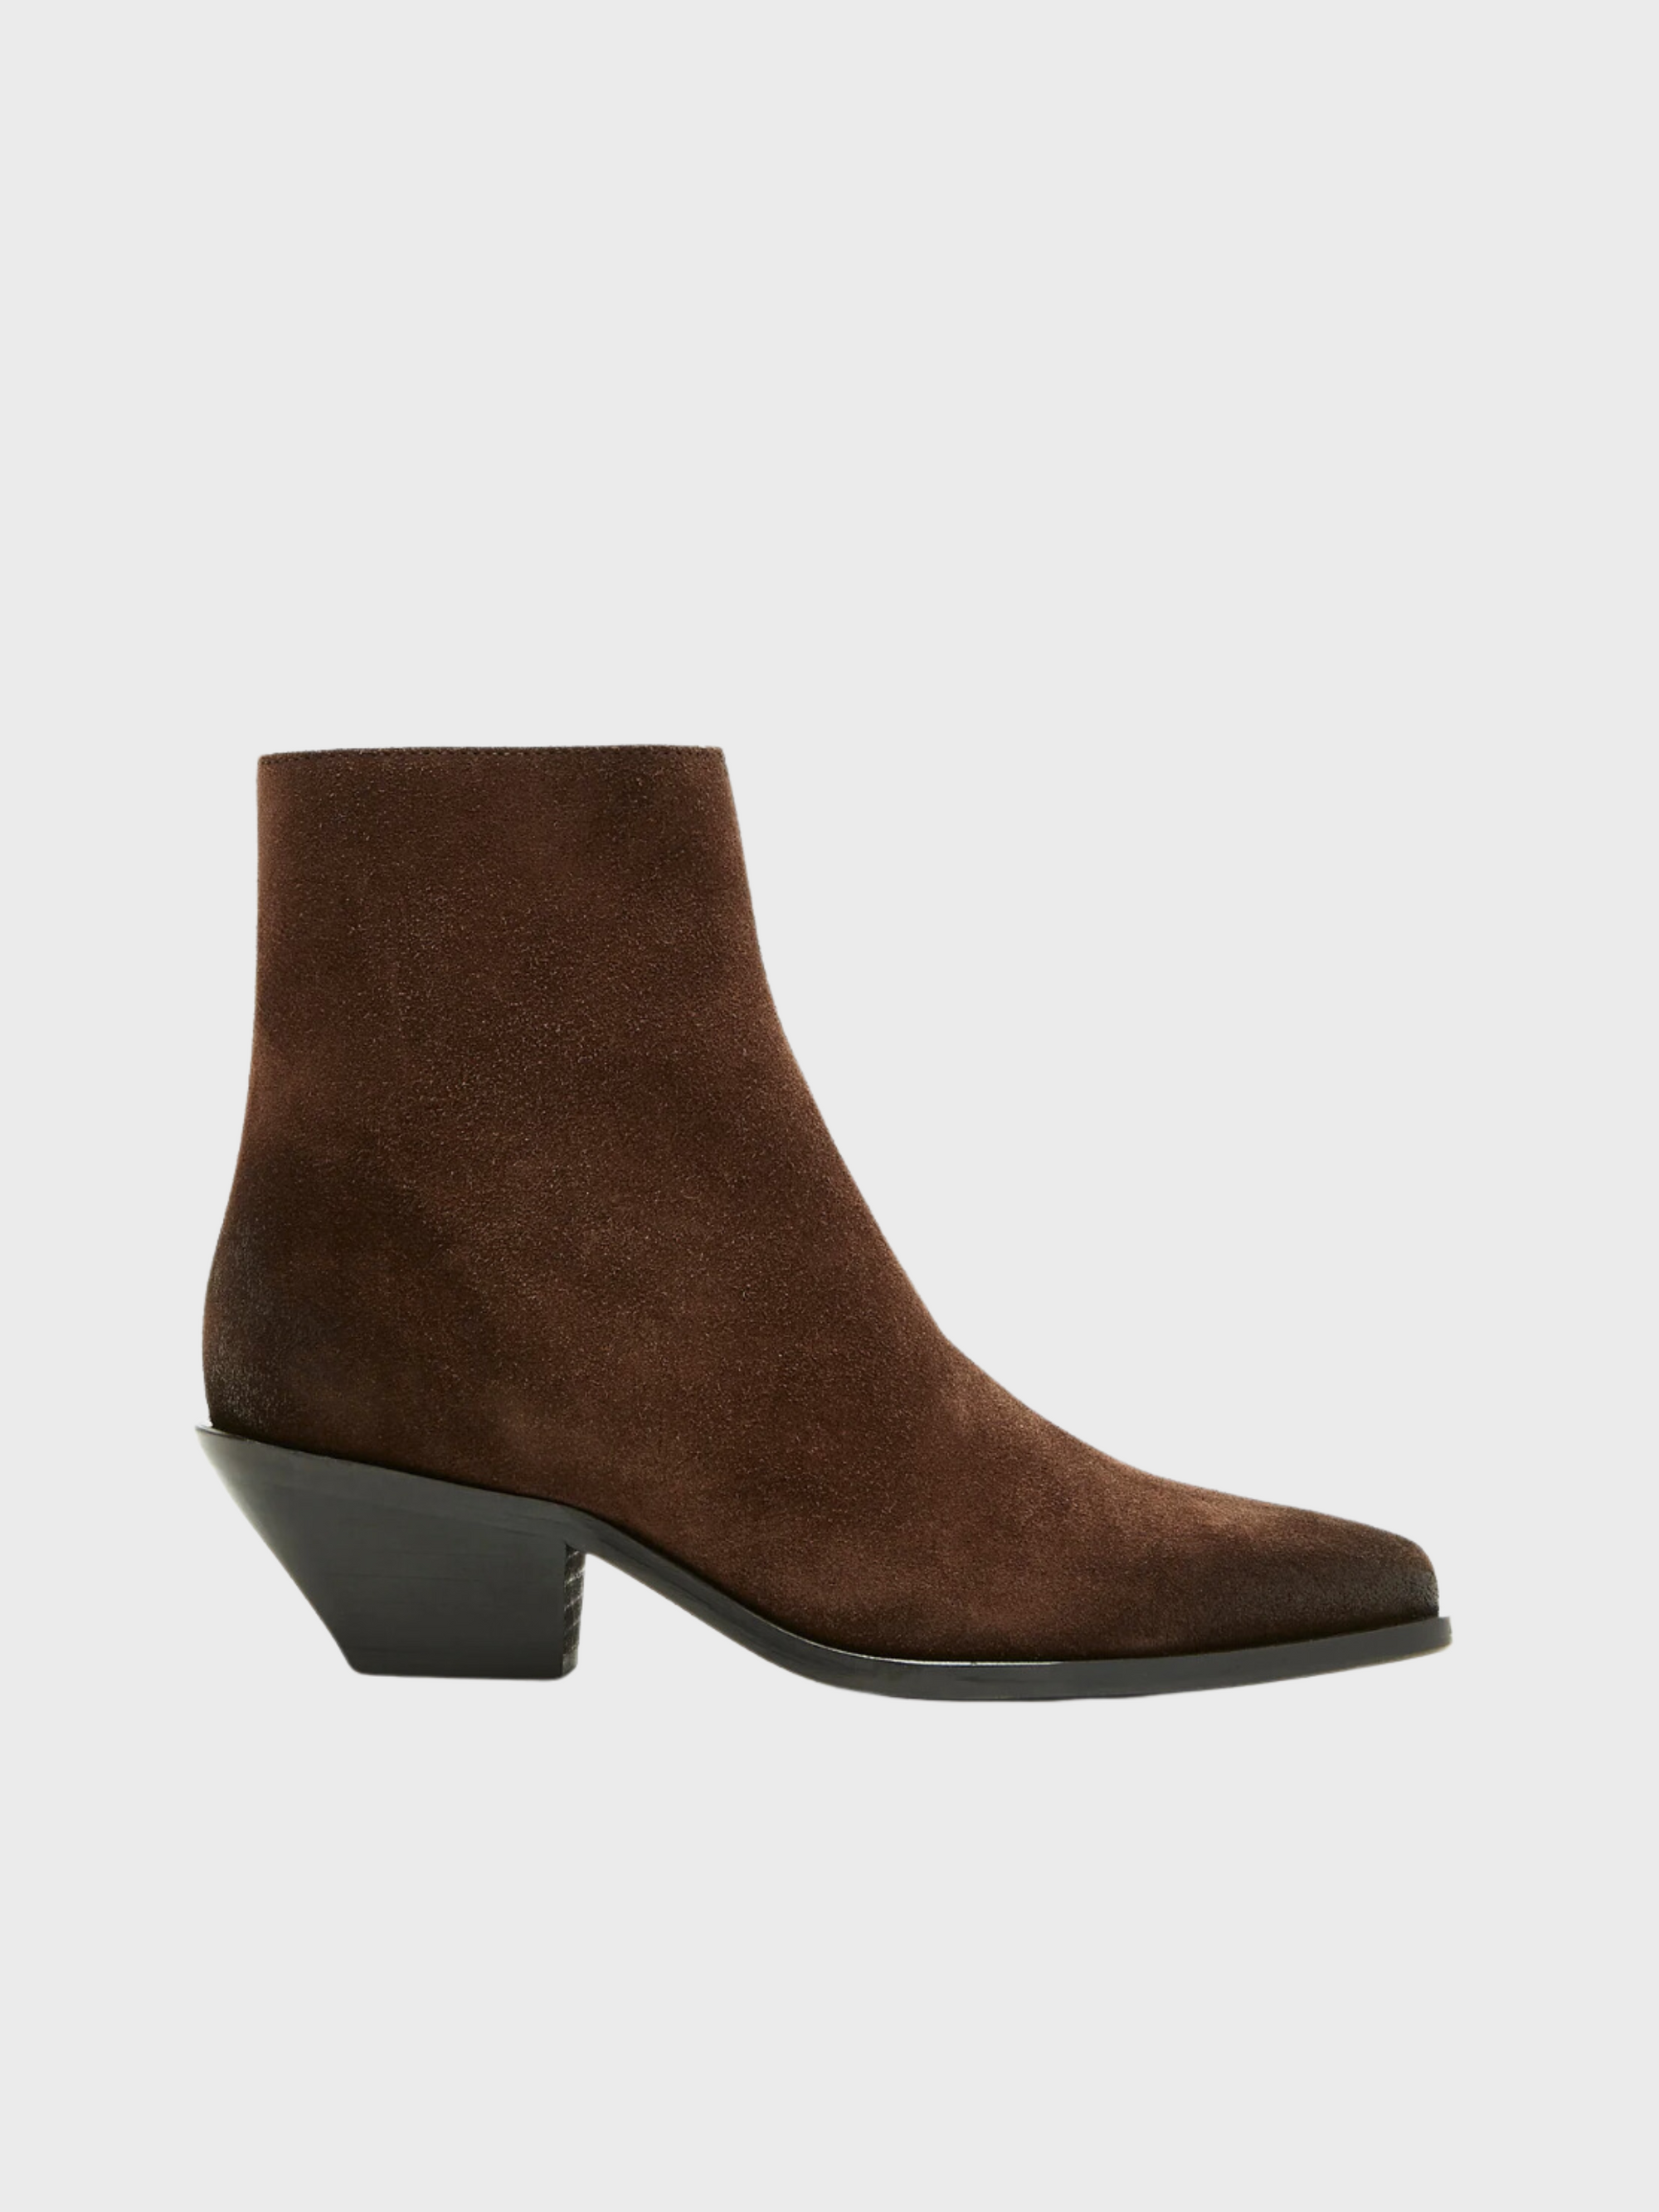 Sister Soeur Zandra Chocolate Suede-Shoes-West of Woodward Boutique-Vancouver-Canada